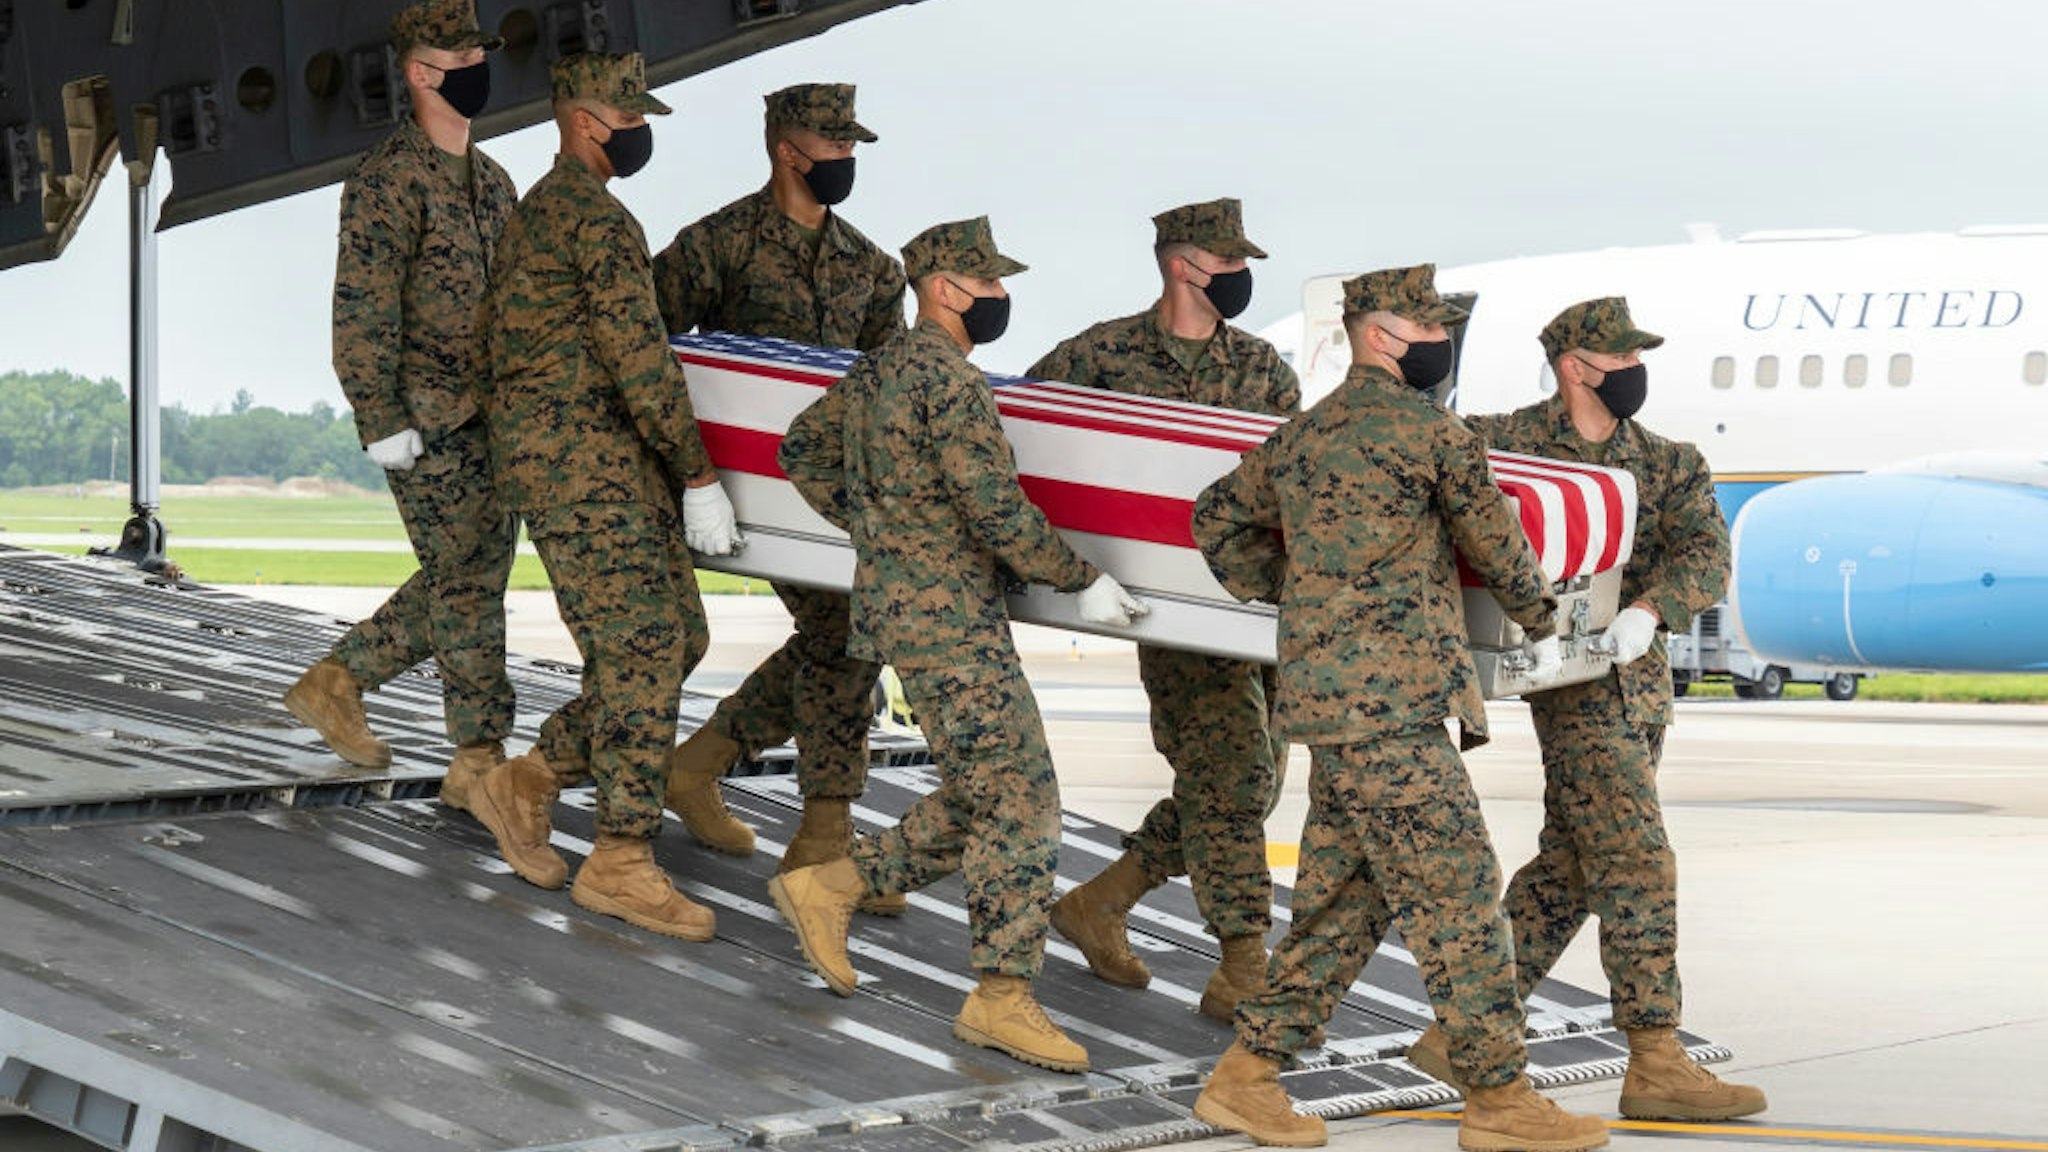 DOVER, DELAWARE - AUGUST 29: In this handout photo provided by the U.S. Air Force, a U.S. Marine Corps carry team transfers the remains of Marine Corps Lance Cpl. Dylan R. Merola of Rancho Cucamonga, California, Aug. 29, 2021 at Dover Air Force Base, Delaware. Merola was assigned to 2nd Battalion, 1st Marine Regiment, 1st Marine Division, I Marine Expeditionary Force, Camp Pendleton, California. (Photo by Jason Minto/U.S. Air Force via Getty Images)